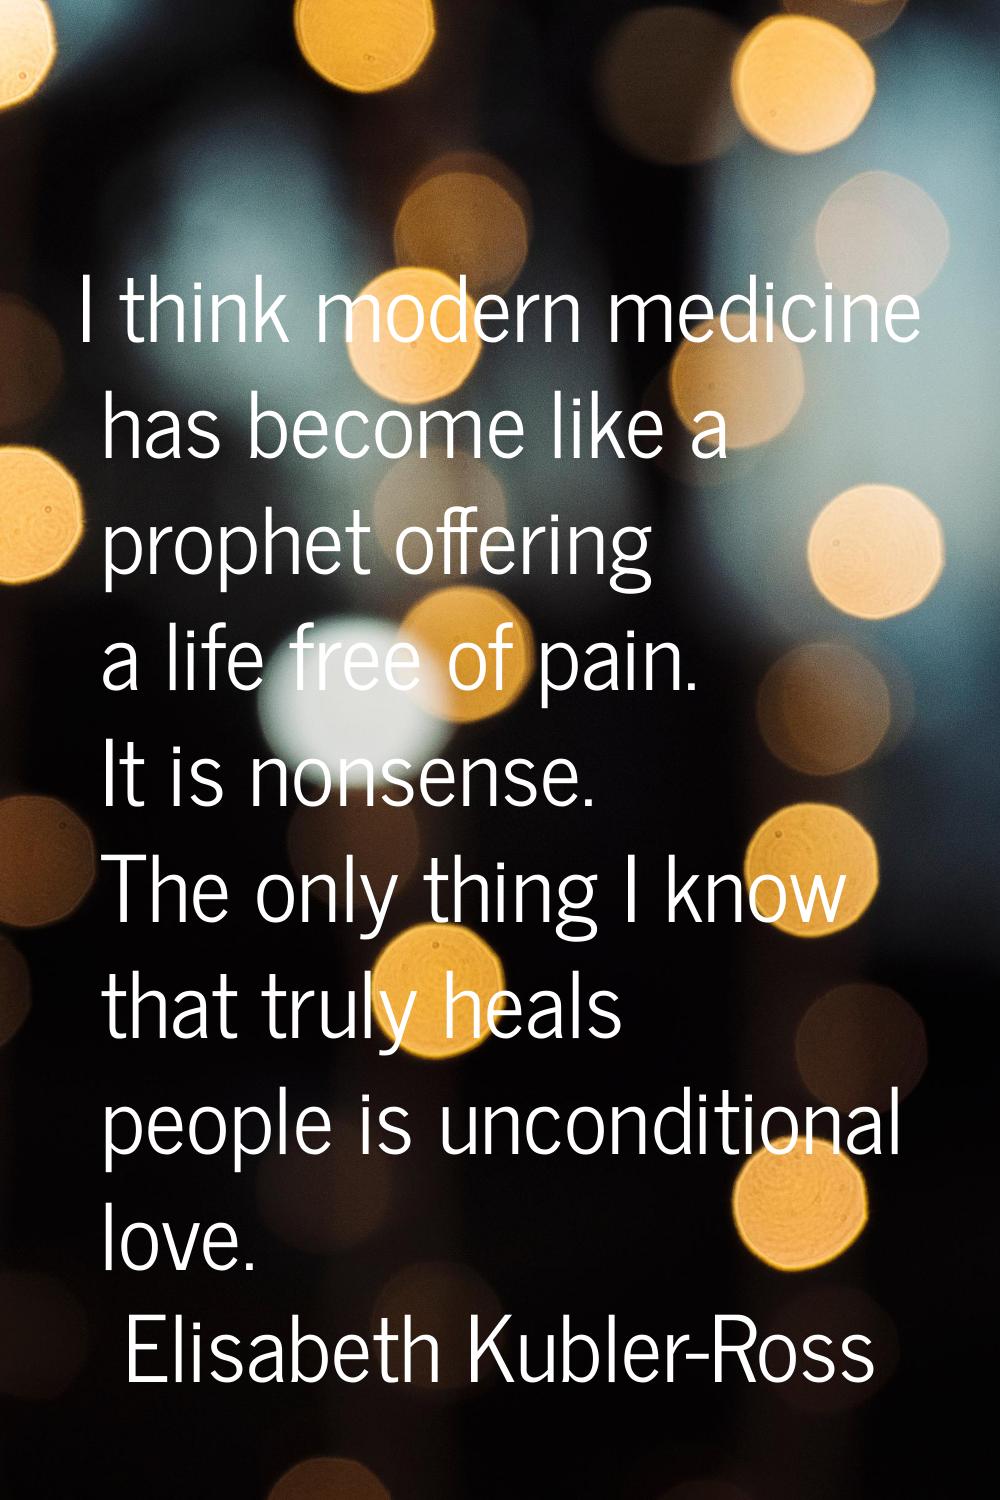 I think modern medicine has become like a prophet offering a life free of pain. It is nonsense. The